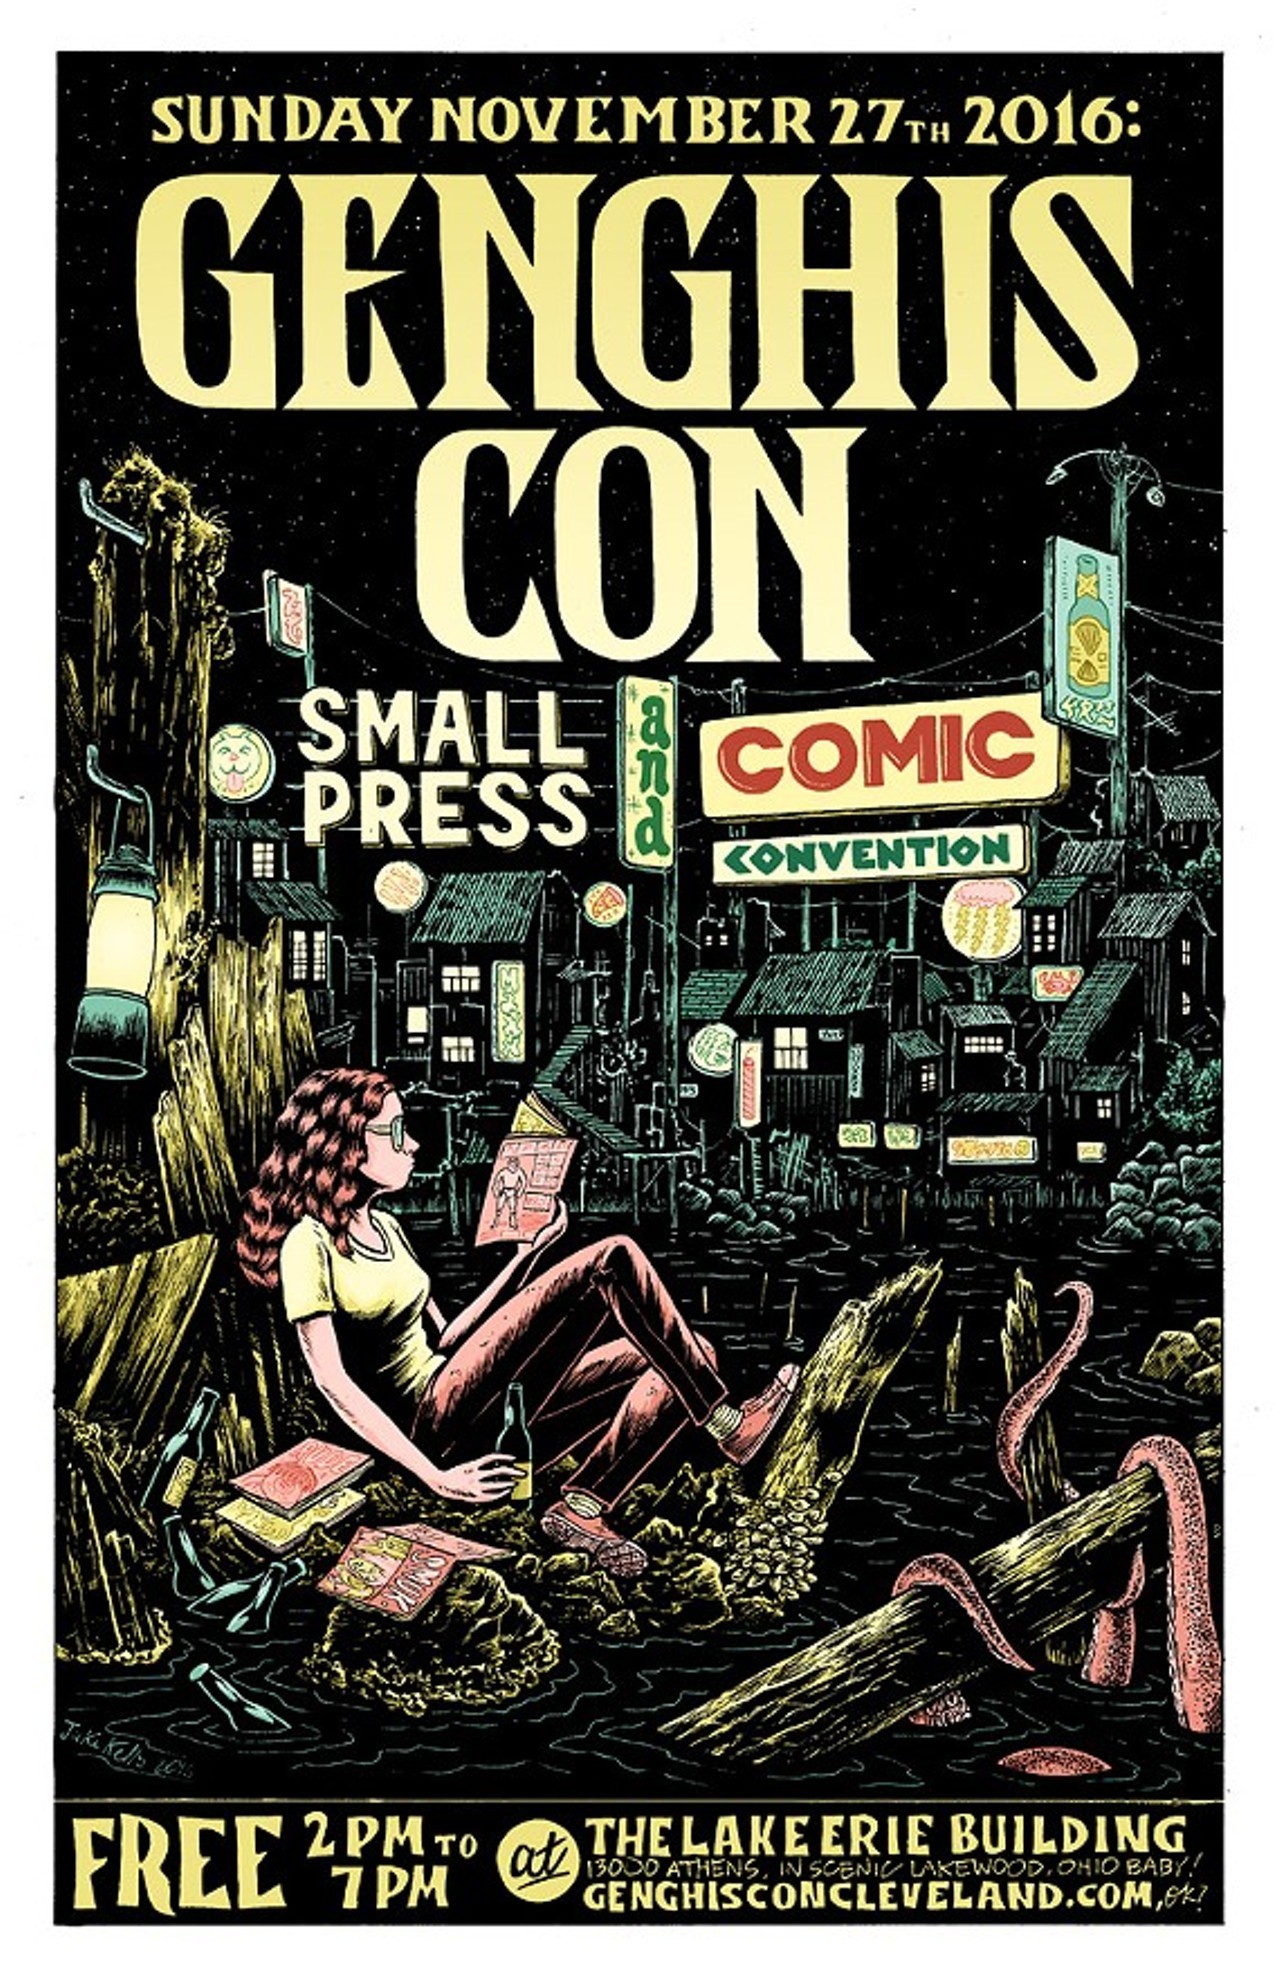 Genghis Con Small Press & Comic Convention 
When: Sun., Nov. 27, 2-7 p.m. 
Phone: 216-570-7626 
Email: genghisconcleveland@gmail.com 
Price: free 
GenghisConCleveland.com
Genghis Con is the best opportunity for fans of small press and independent comics, artwork, zines and literature to find those hidden gems being cultivated right here in the region. Attendees can expect to see, and visit with and purchase work from, long-standing Genghis Con regulars like Derf, Gary and Laura Dumm, John G and Jake Kelly, as well as Genghis Con first timers like Noah Van Sciver, whose work has been published by Fantagraphics as well as Ivan Brandon, most recently the writer of Image Comics&#146; Drifter.